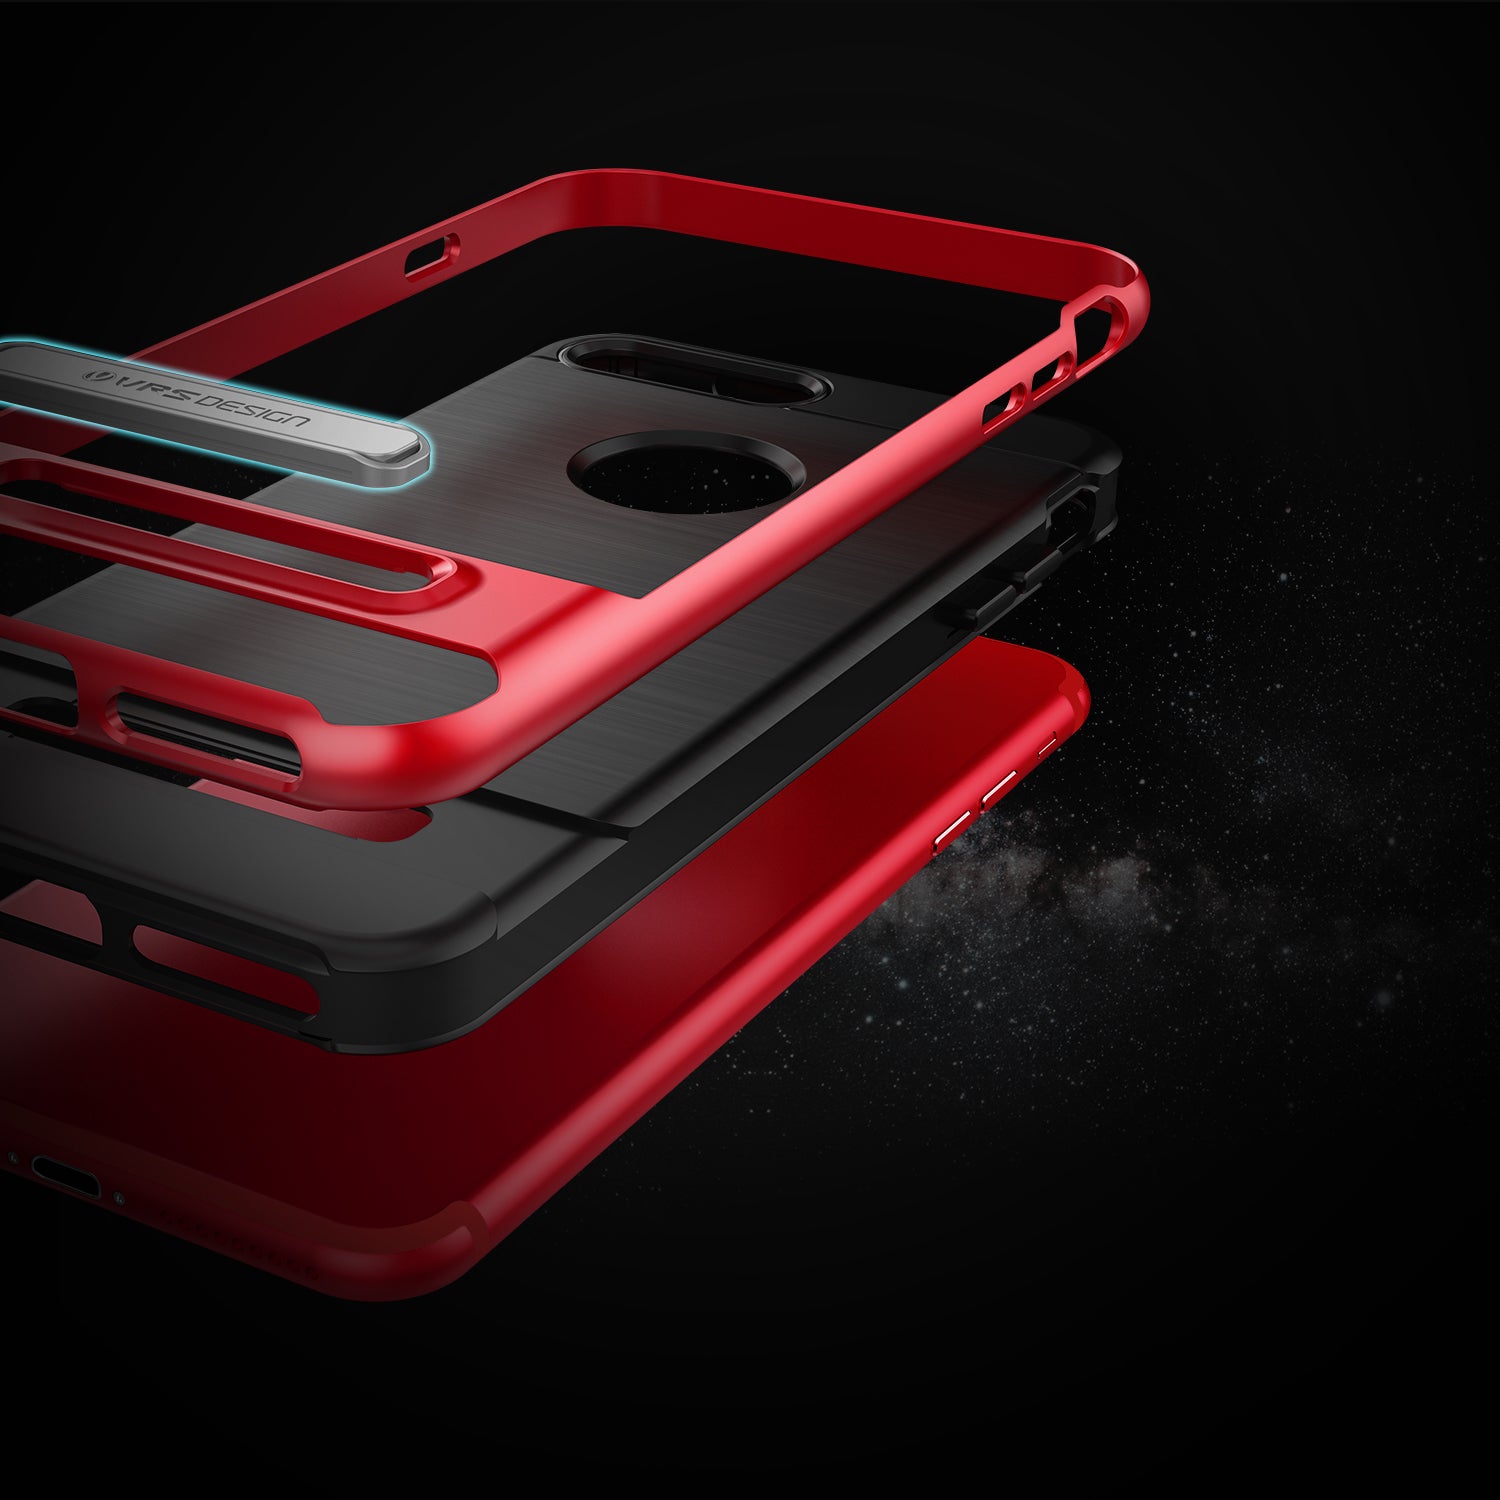 High Pro Shield Series Original From VRS Design Anti-shocks Case For iPhone 7 Plus Black / Red